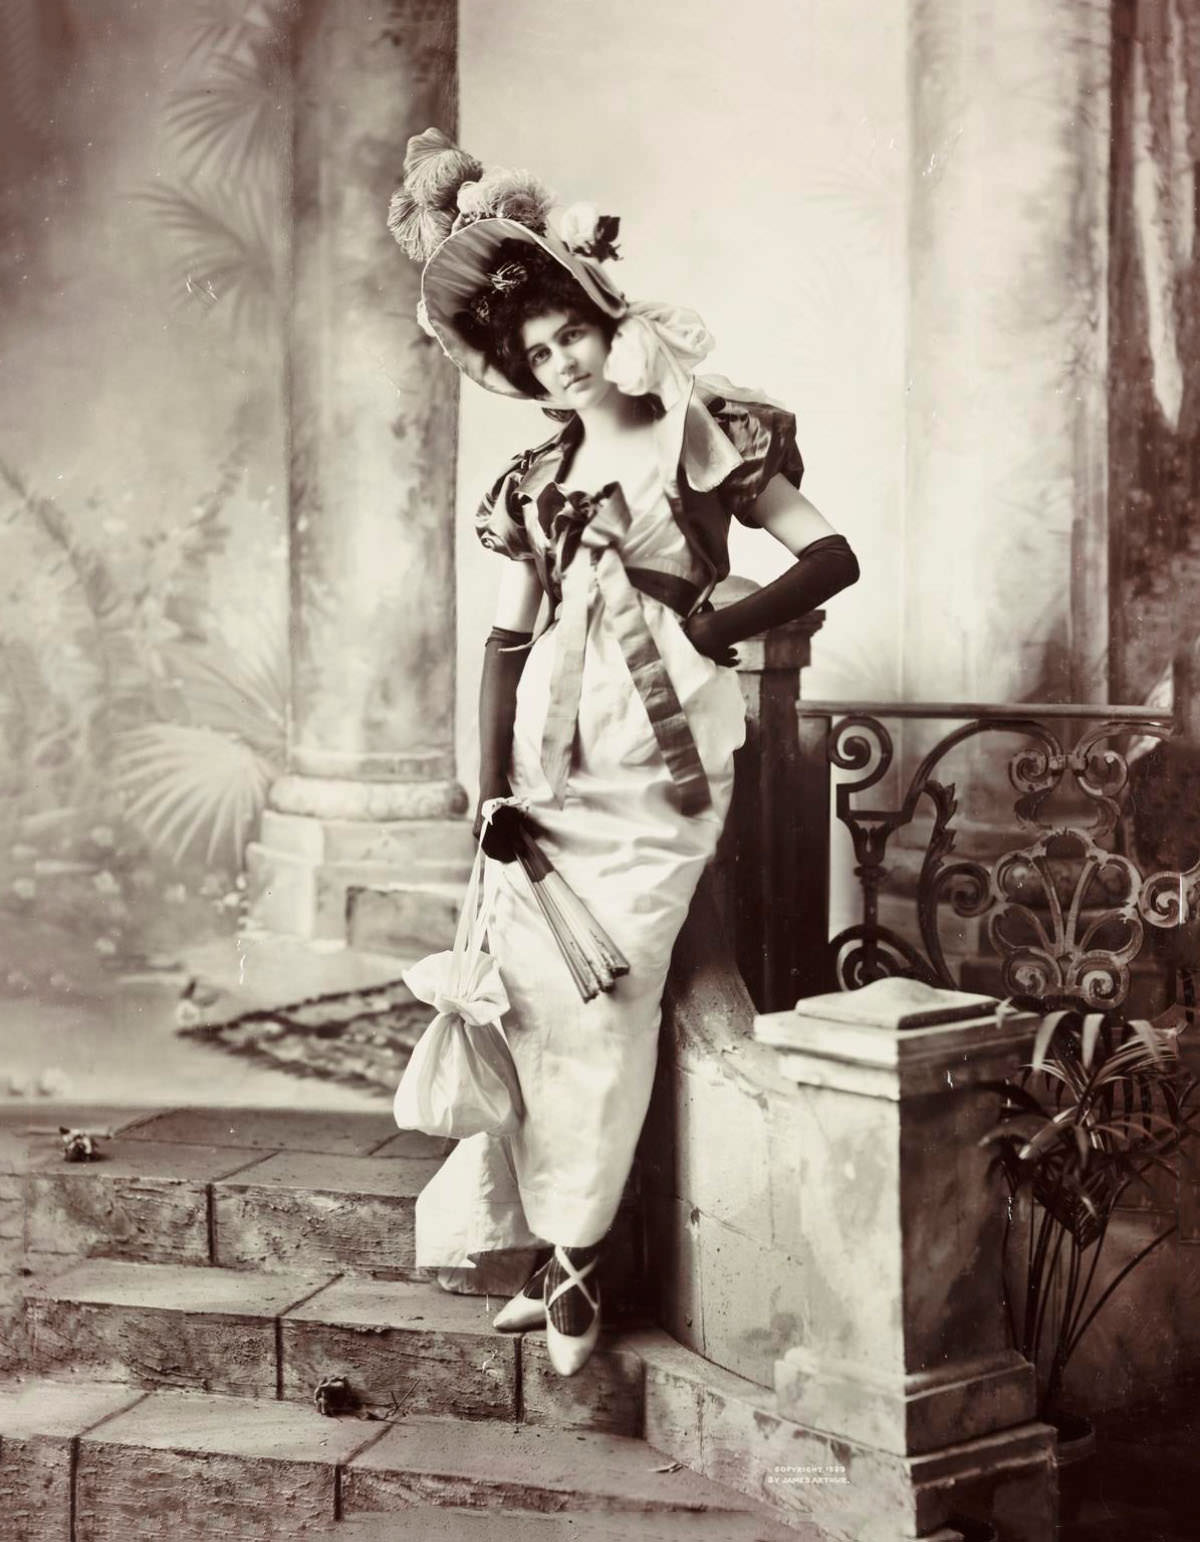 Spectacular Portraits of American Women at the Turn of the 20th Century by James Arthur